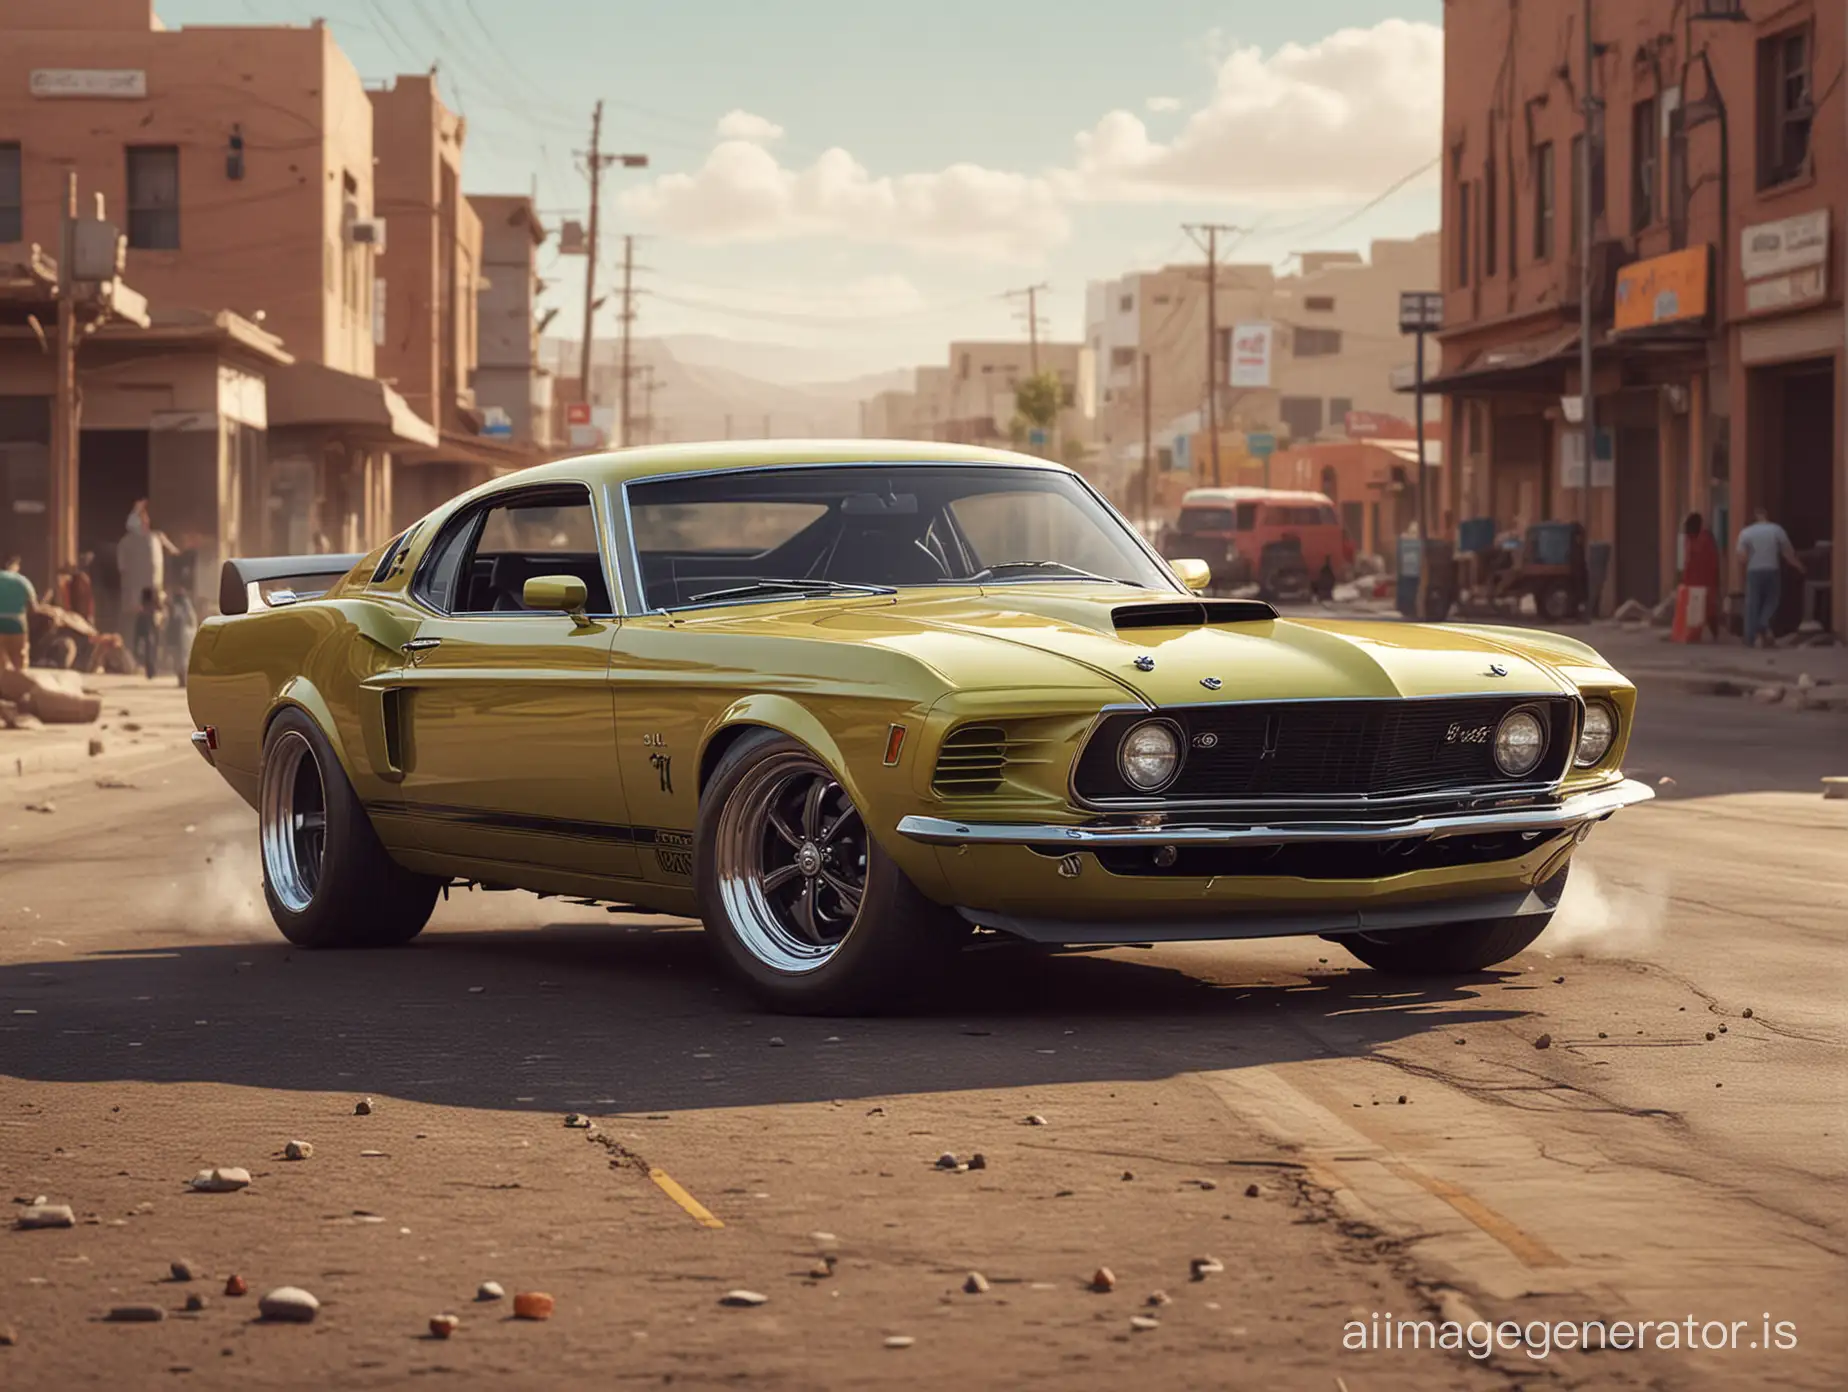 Customized-1970-Ford-Mustang-in-Daylight